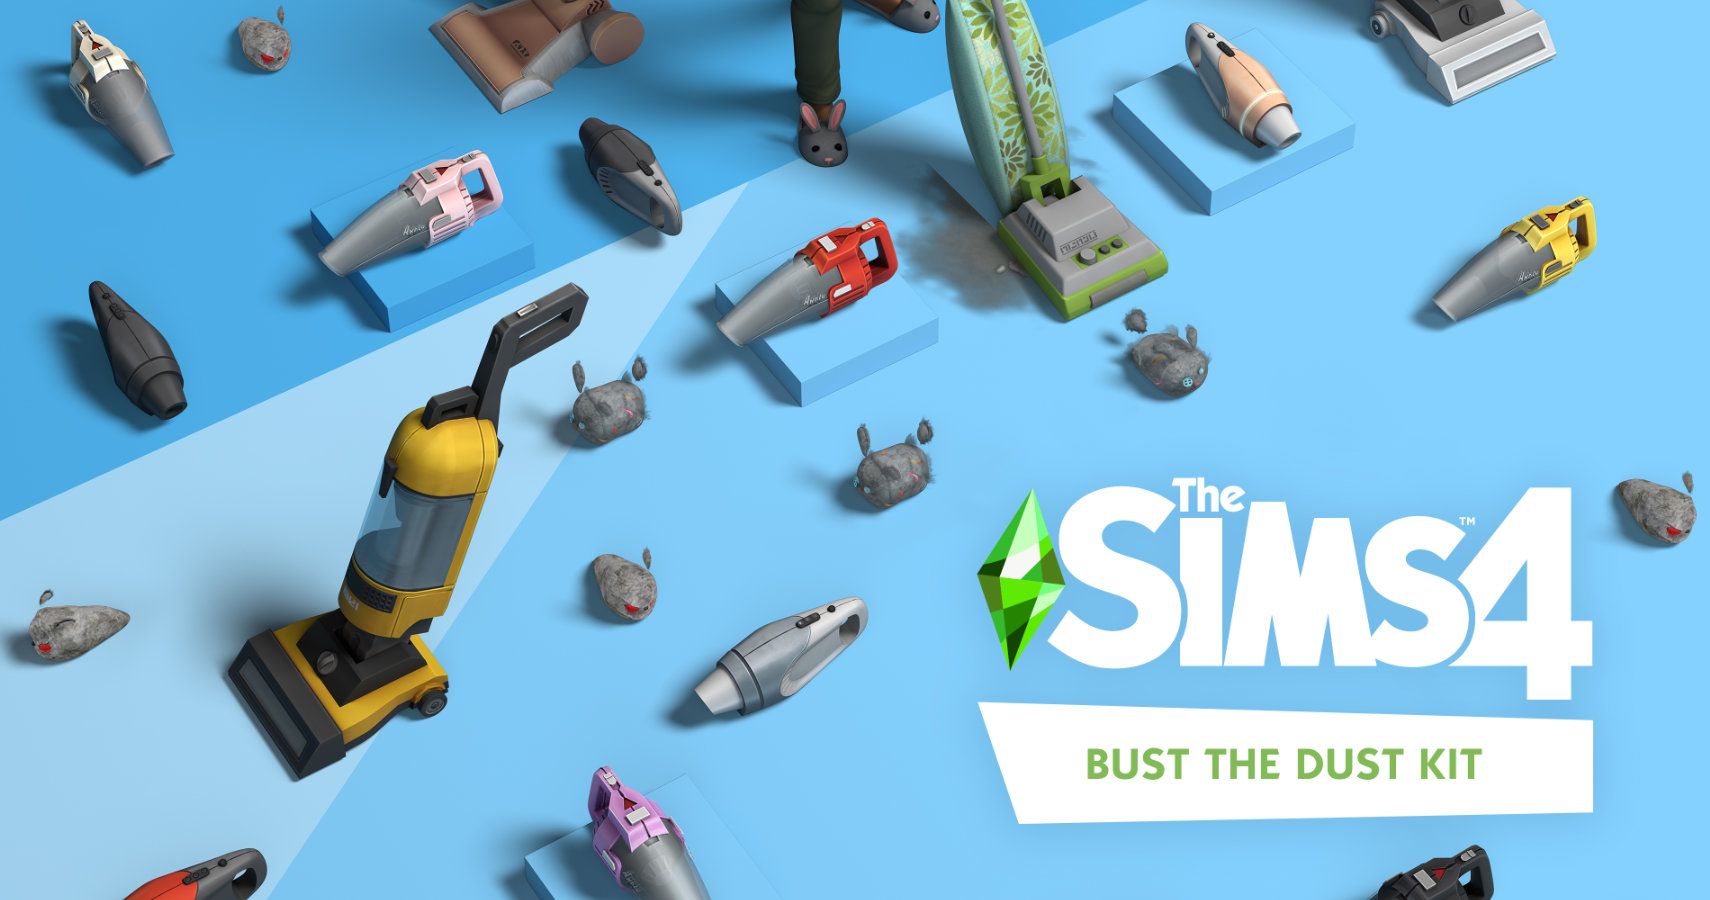 Bust the dust items behind a sims 4 logo.